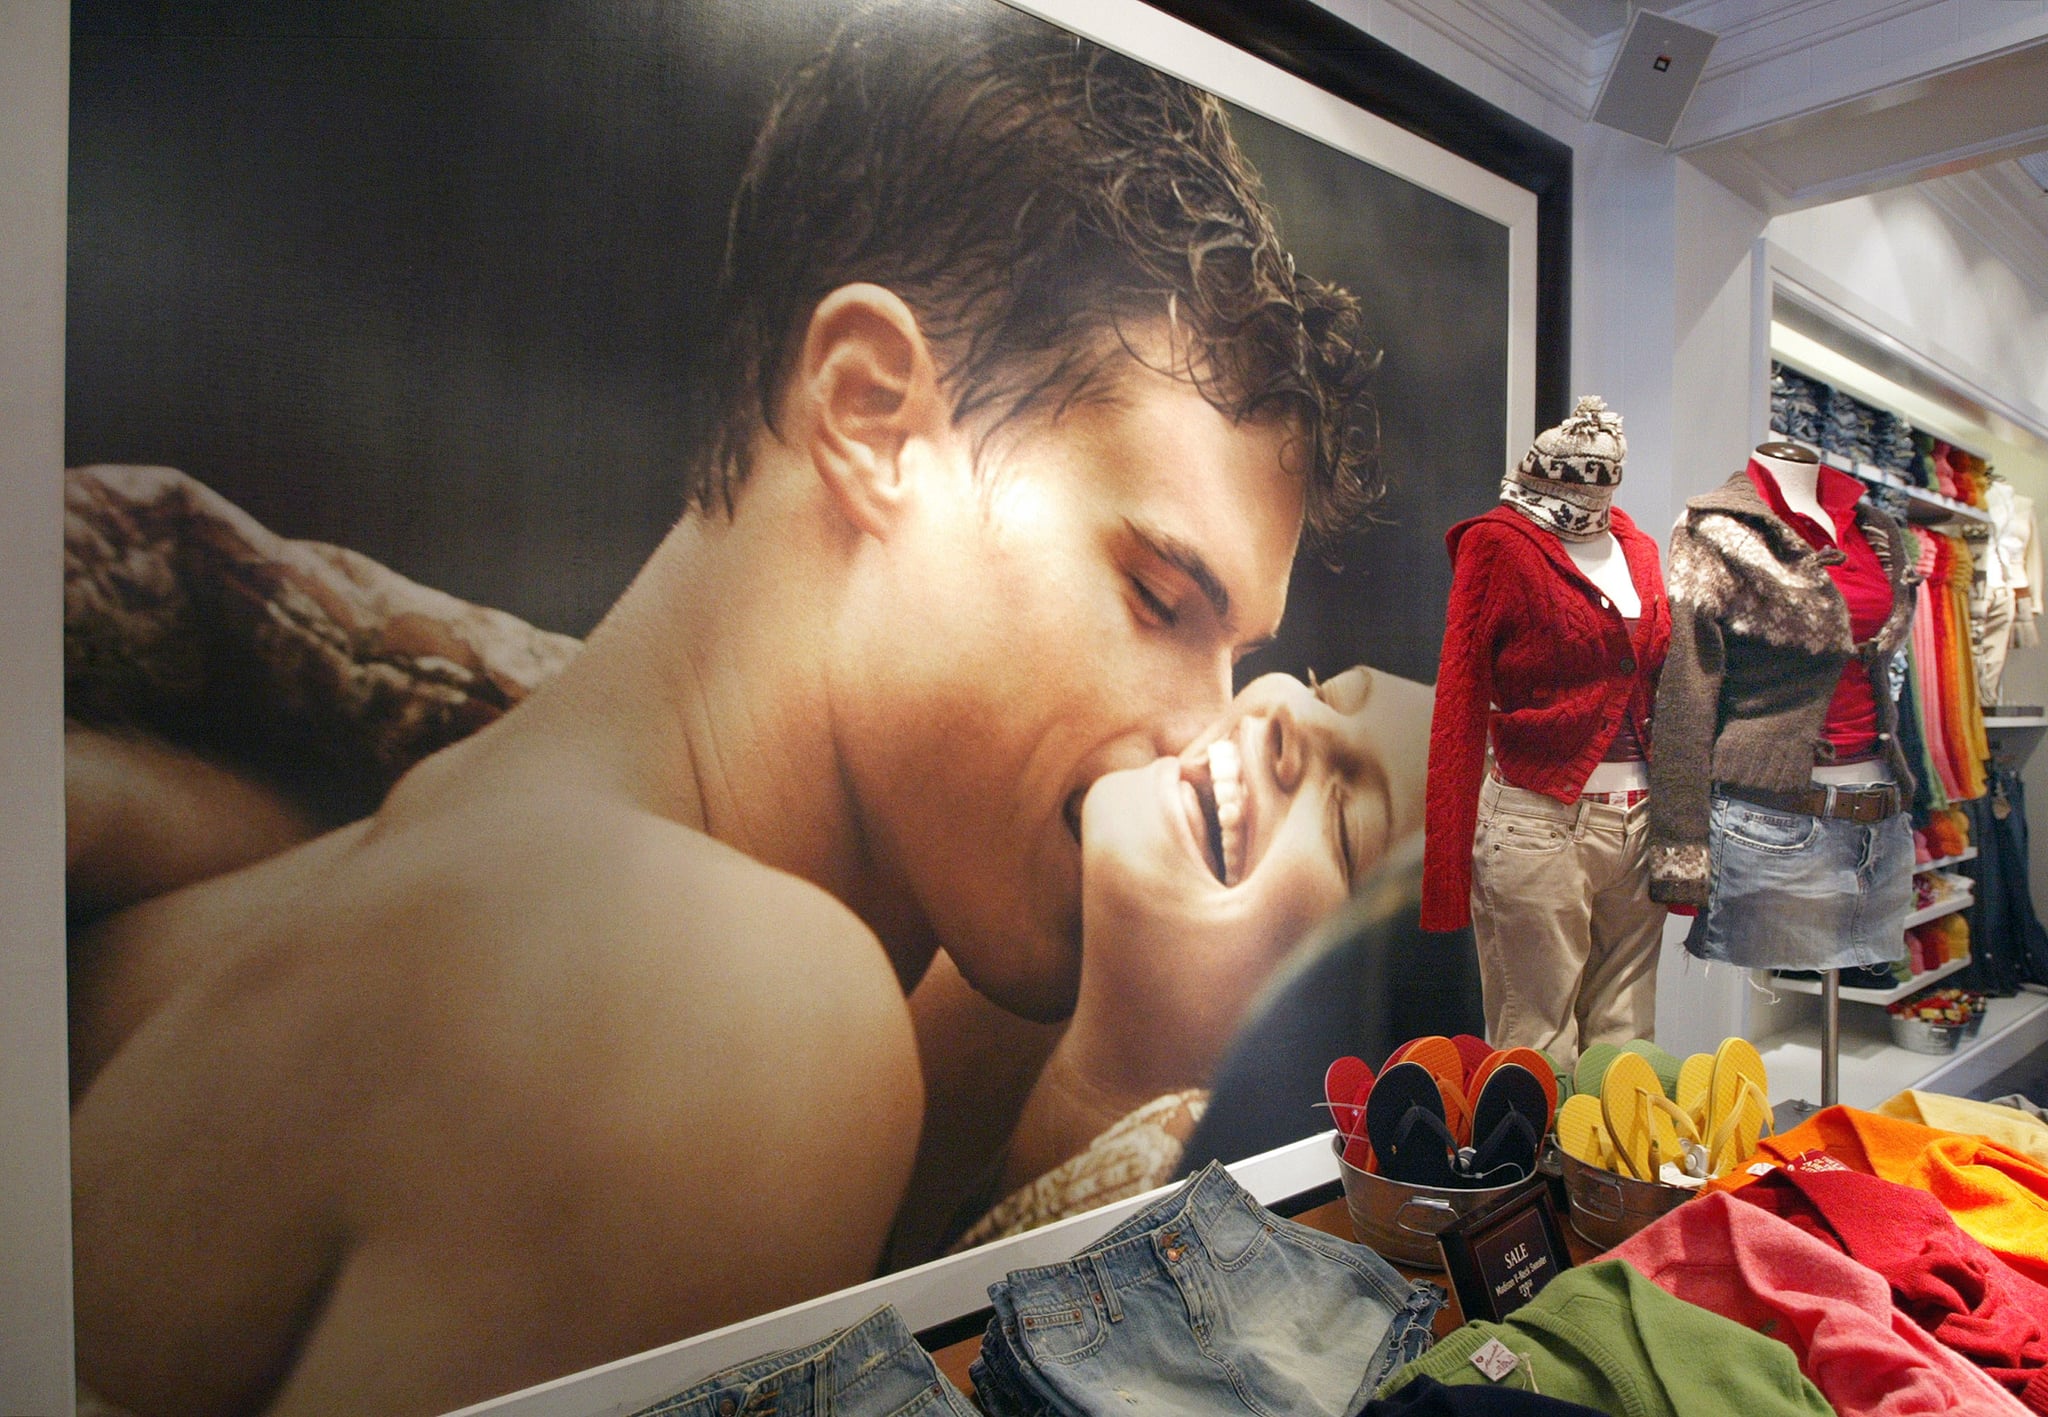 CHICAGO - DECEMBER 8:  Abercrombie & Fitch clothing is displayed in one of its stores December 8, 2003 in Chicago, Illinois. A recent report claims that Abercrombie & Fitch discriminates against sales representatives based on their 